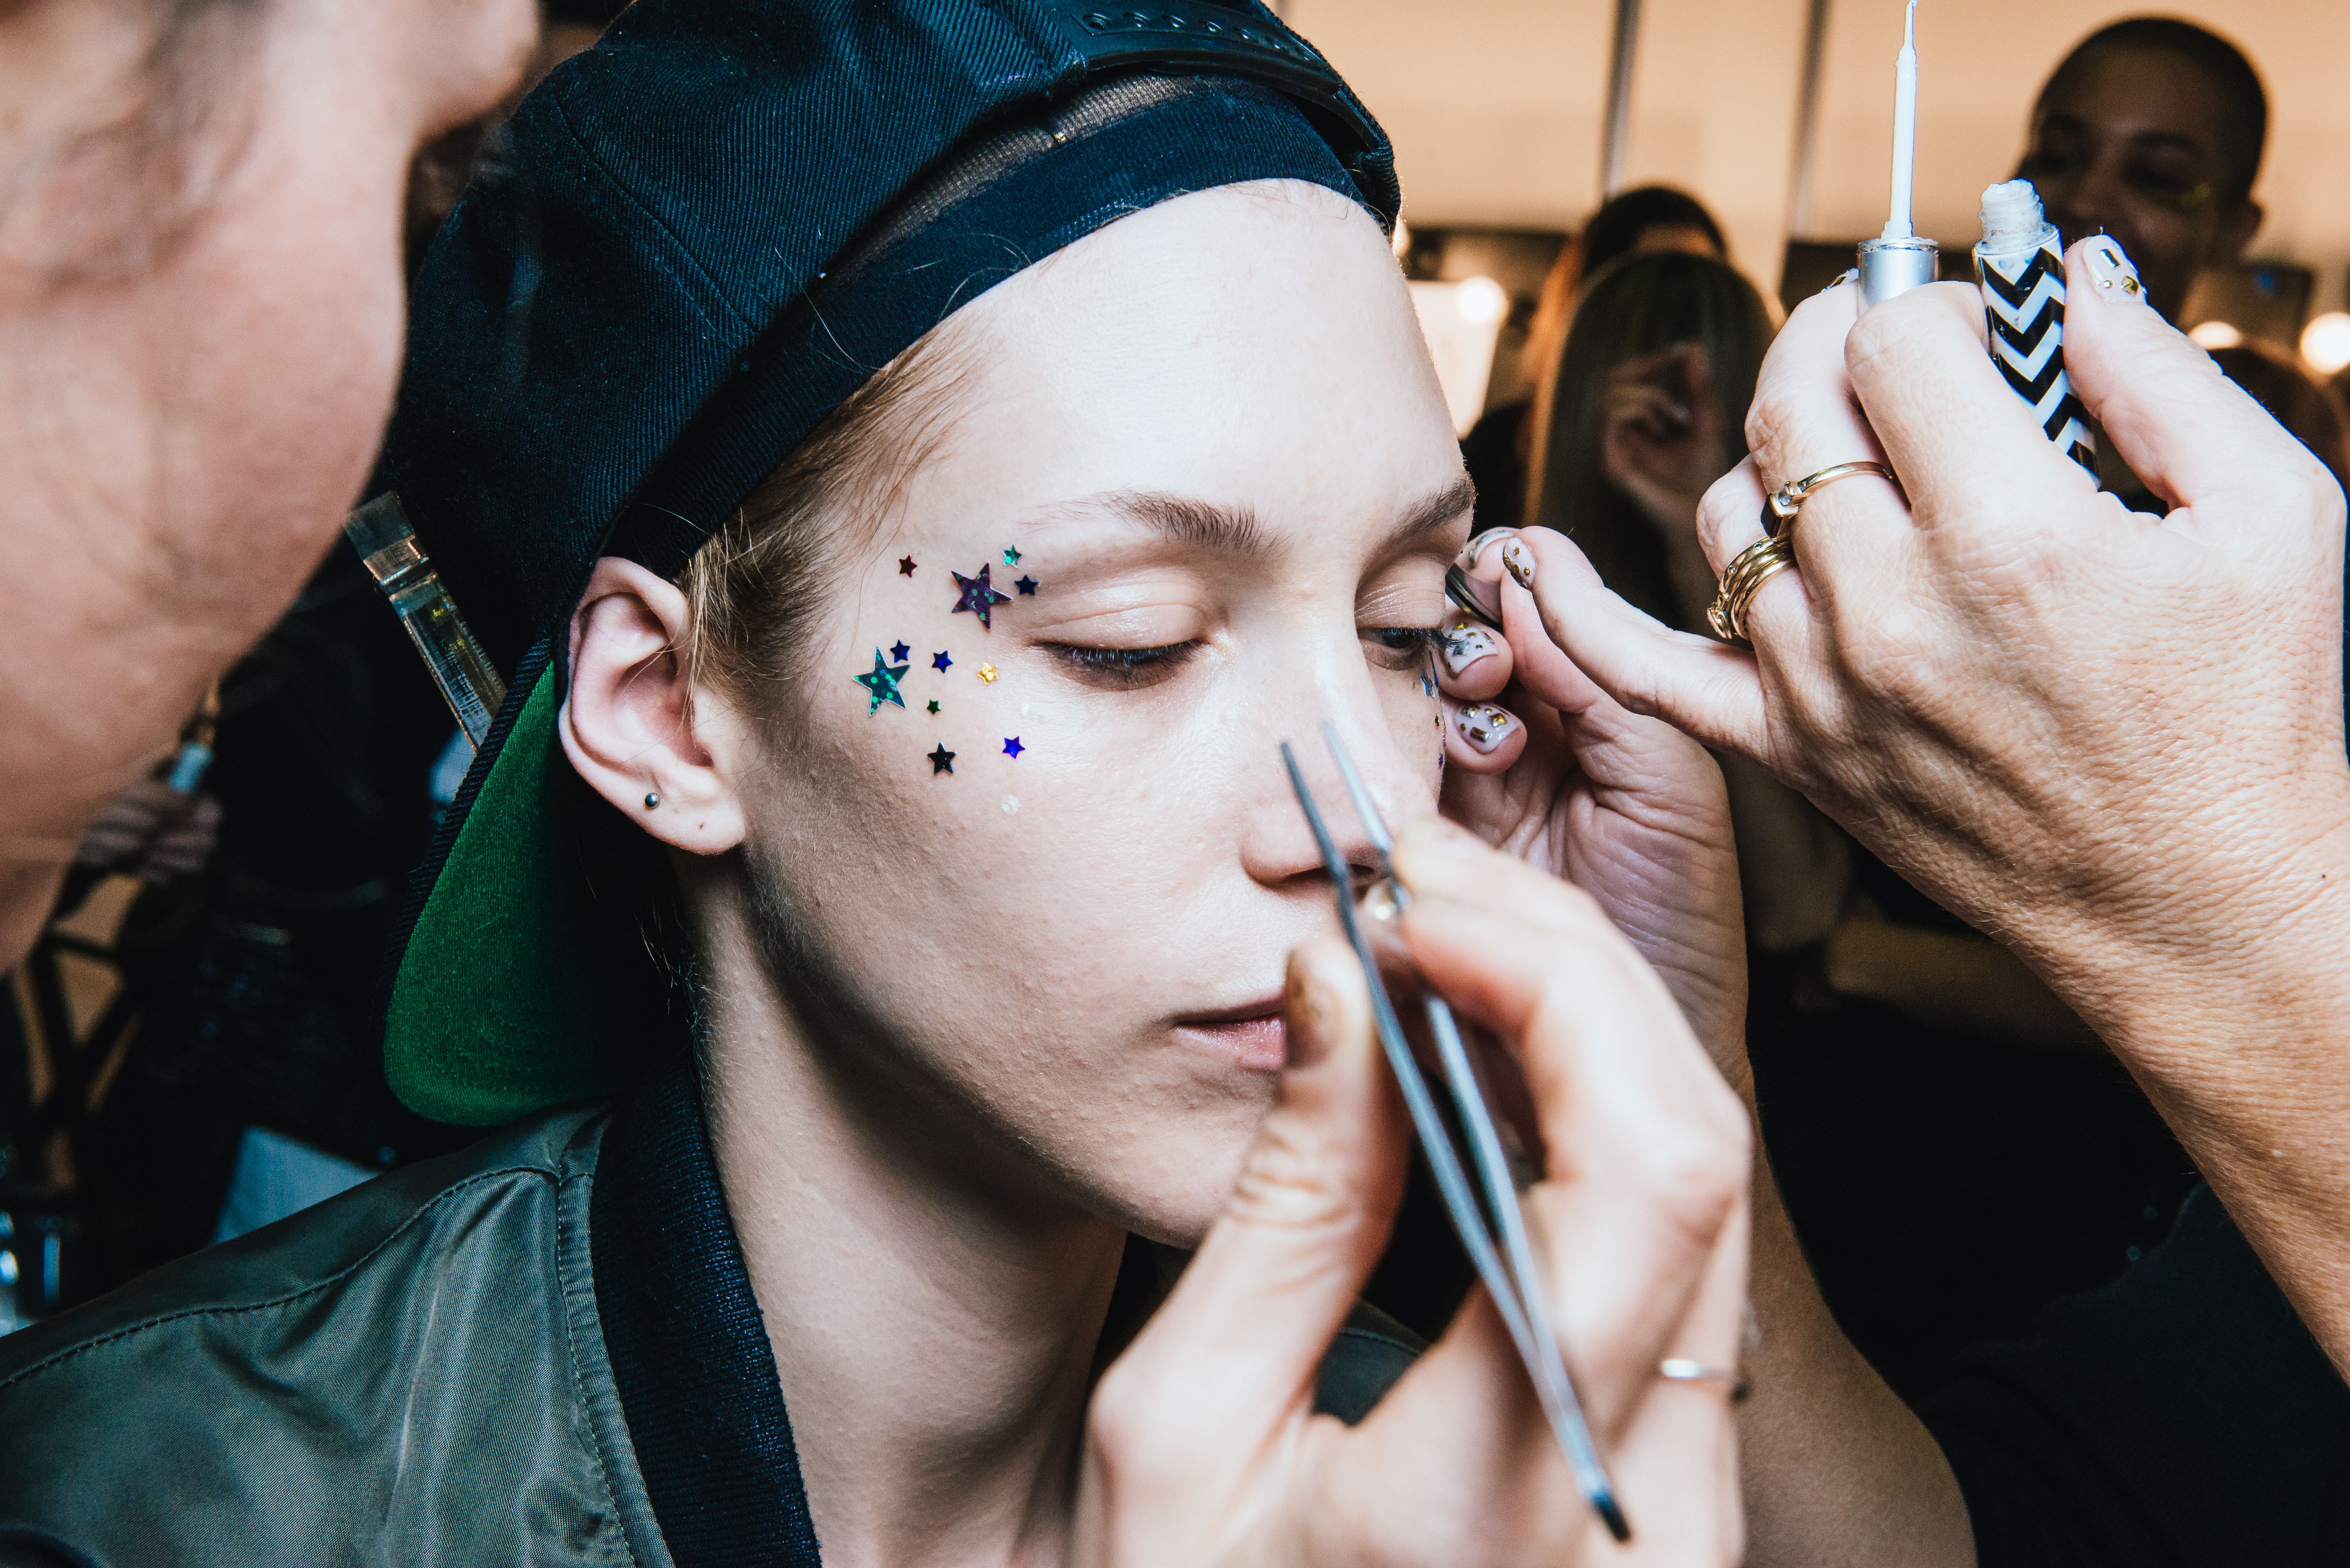 Makeup artists work on a model in a beauty convention